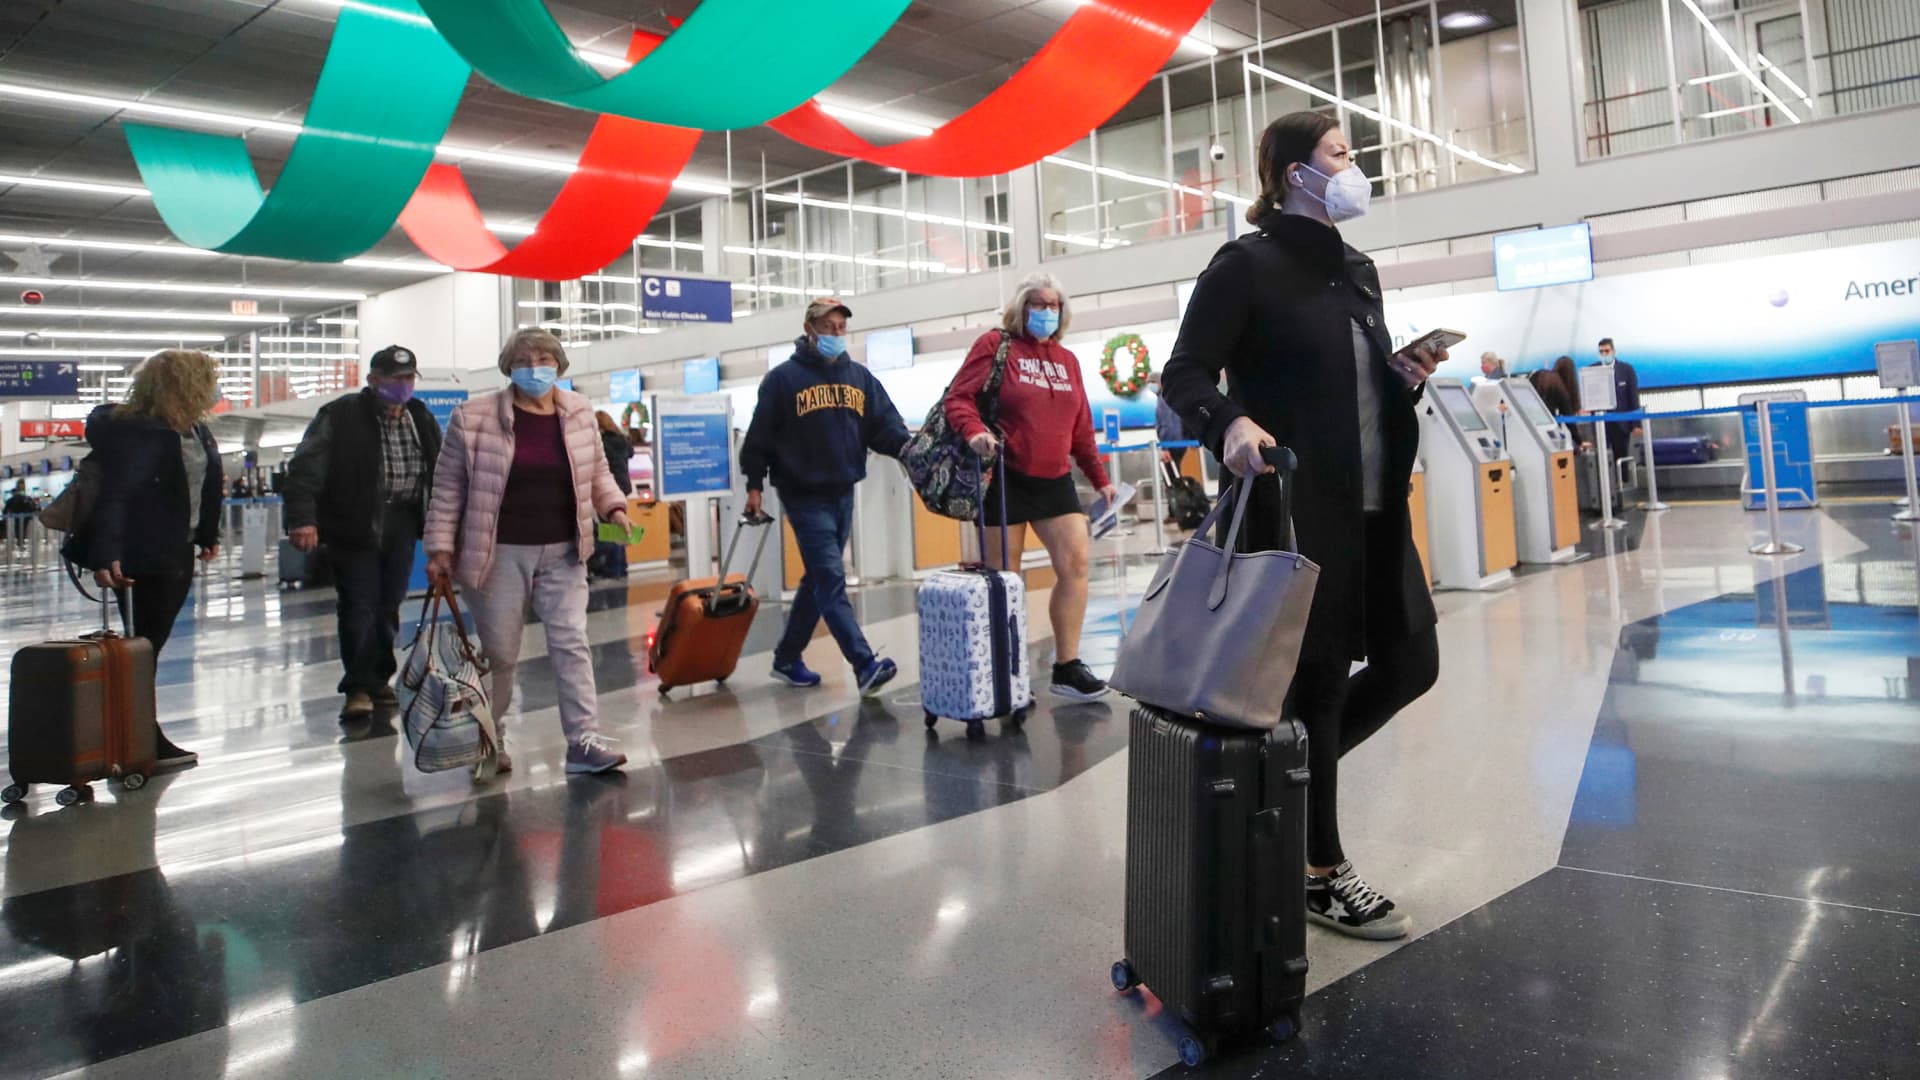 Travelers pass through O'Hare International Airport ahead of the Thanksgiving holiday during the coronavirus disease (COVID-19) pandemic, in Chicago, Illinois, November 25, 2020.